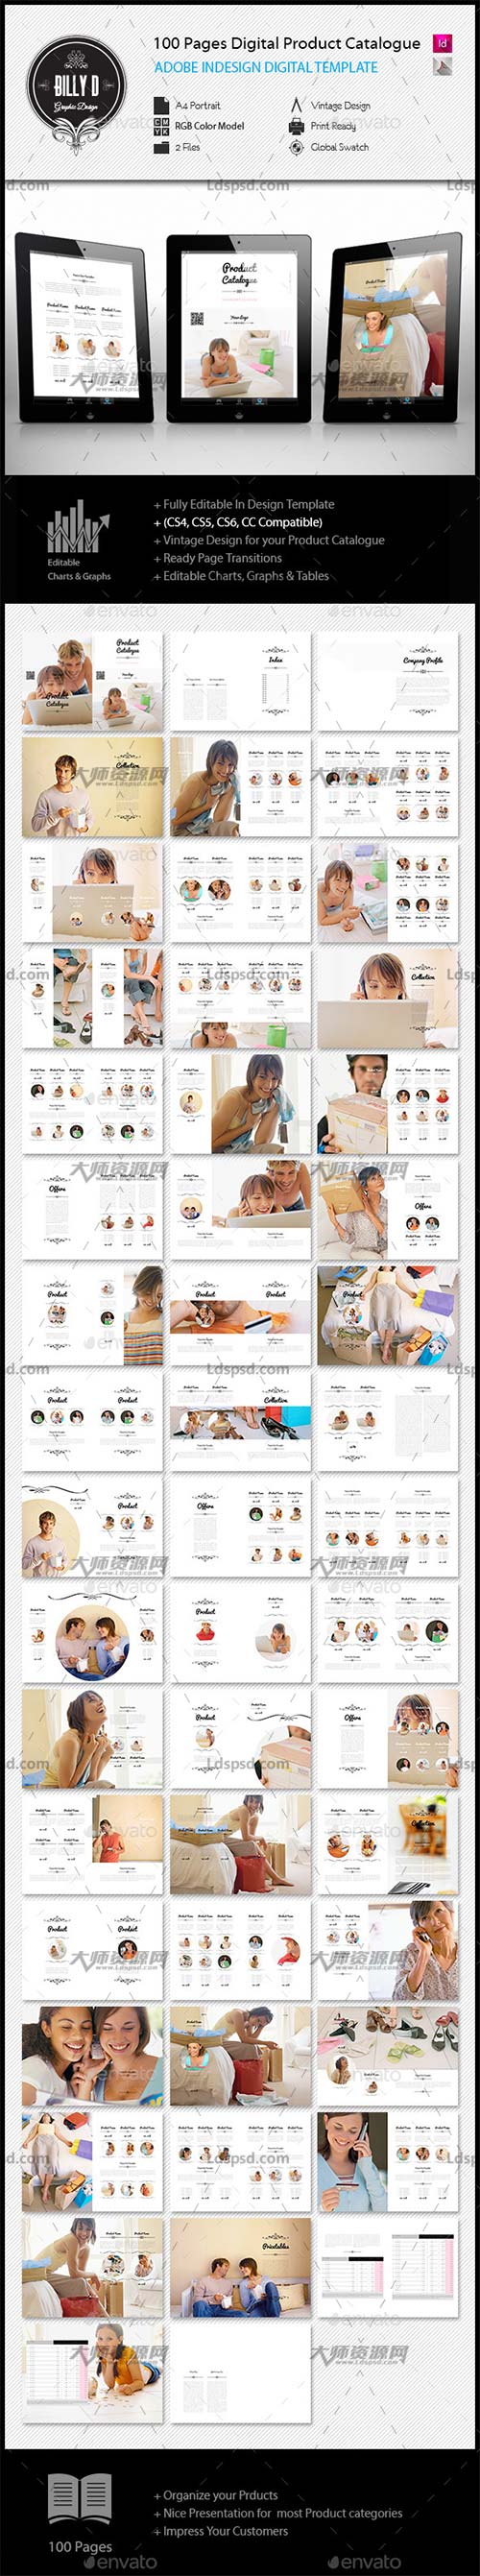 100 pages A4 Digital Product Catalogue Template,indesign模板－产品目录(数码类/100页)